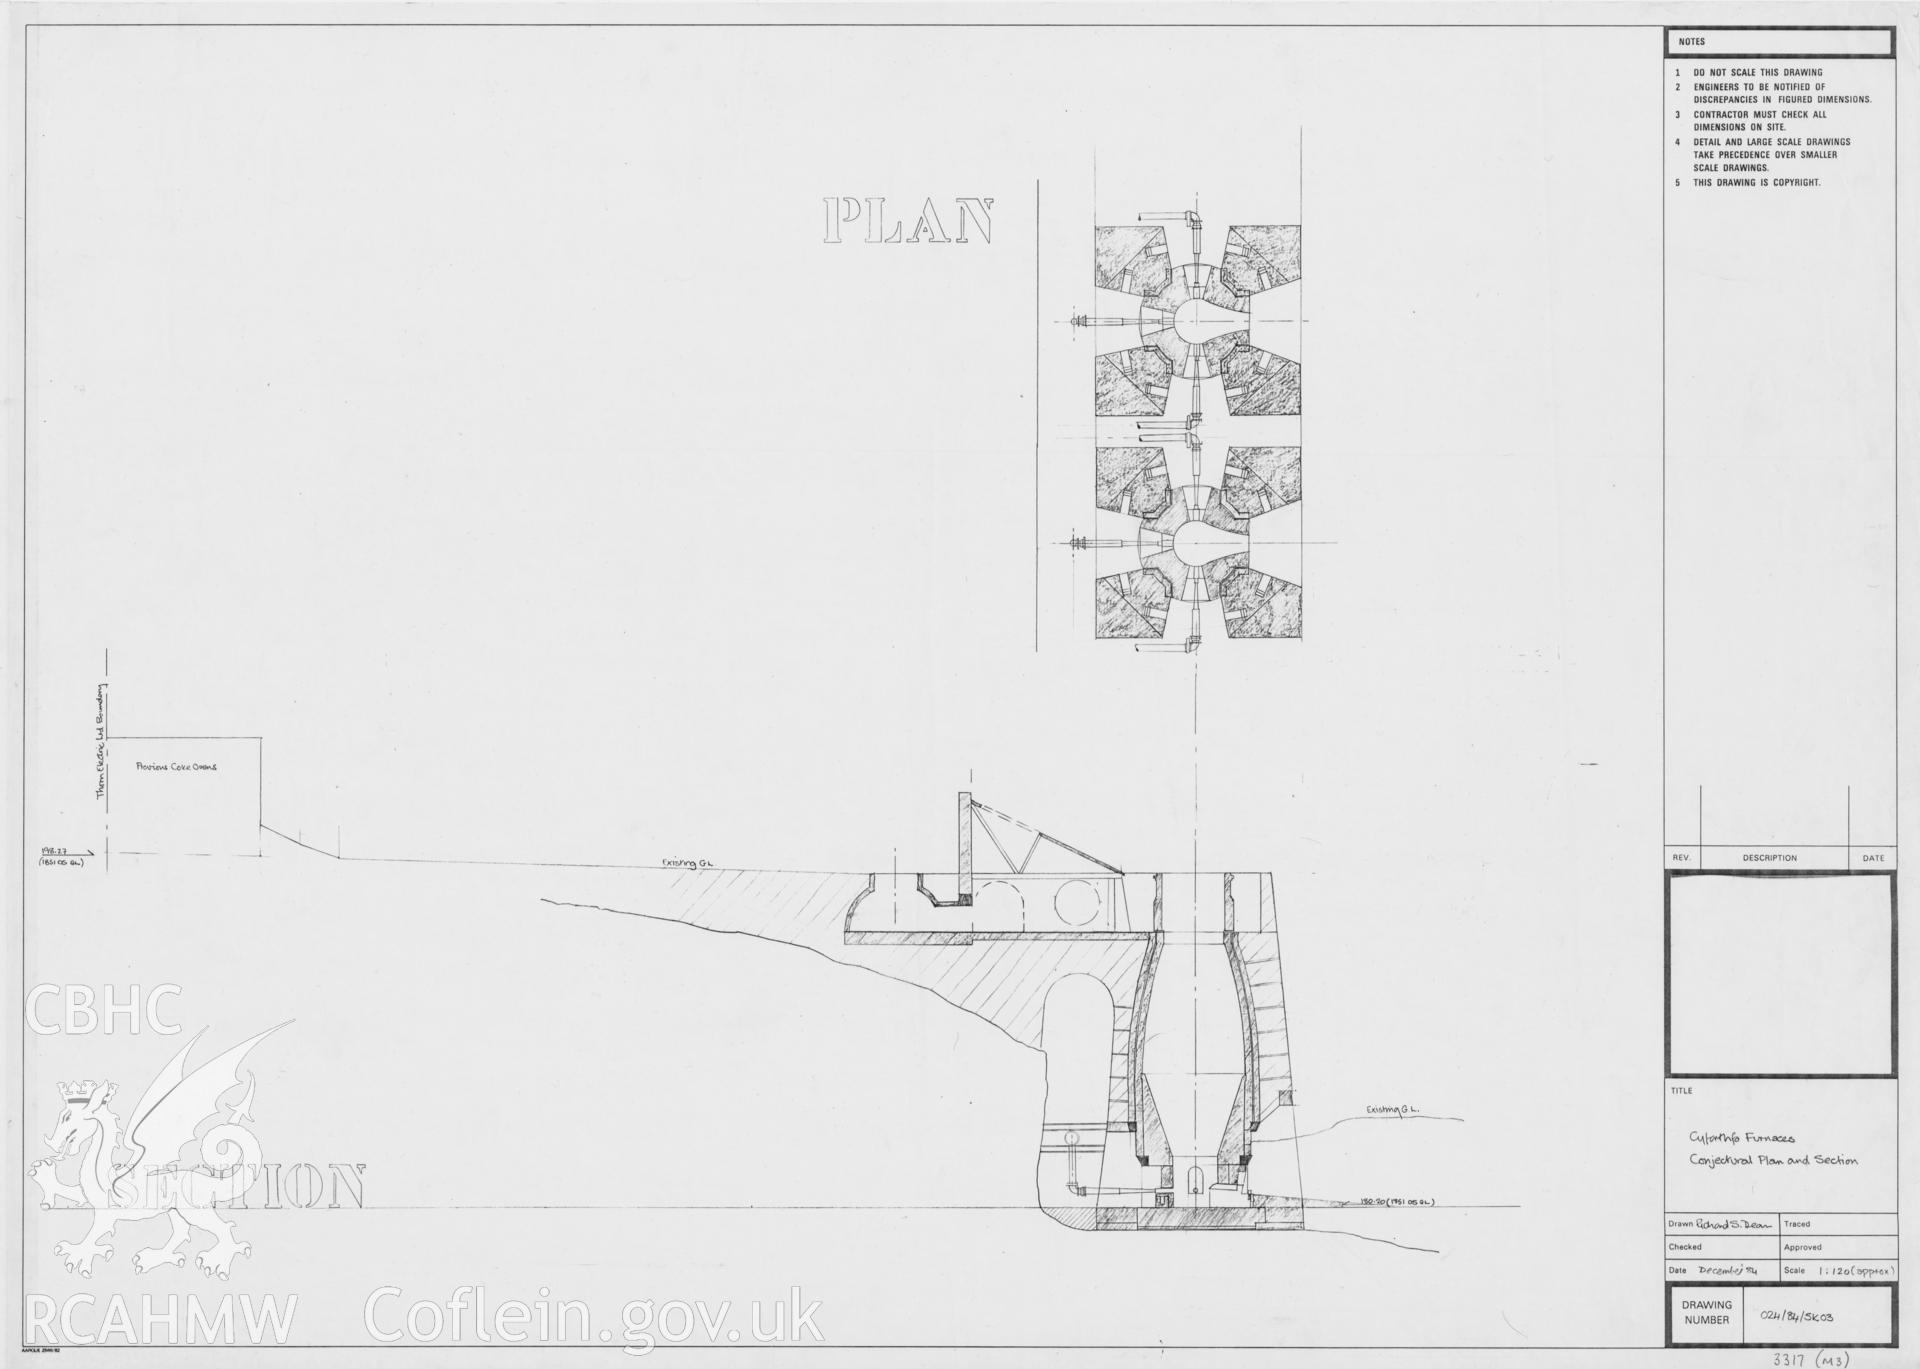 Digital copy of a non RCAHMW drawing by Richard S. Dean, showing conjectural plan and survey of Cyfarthfa Ironworks.